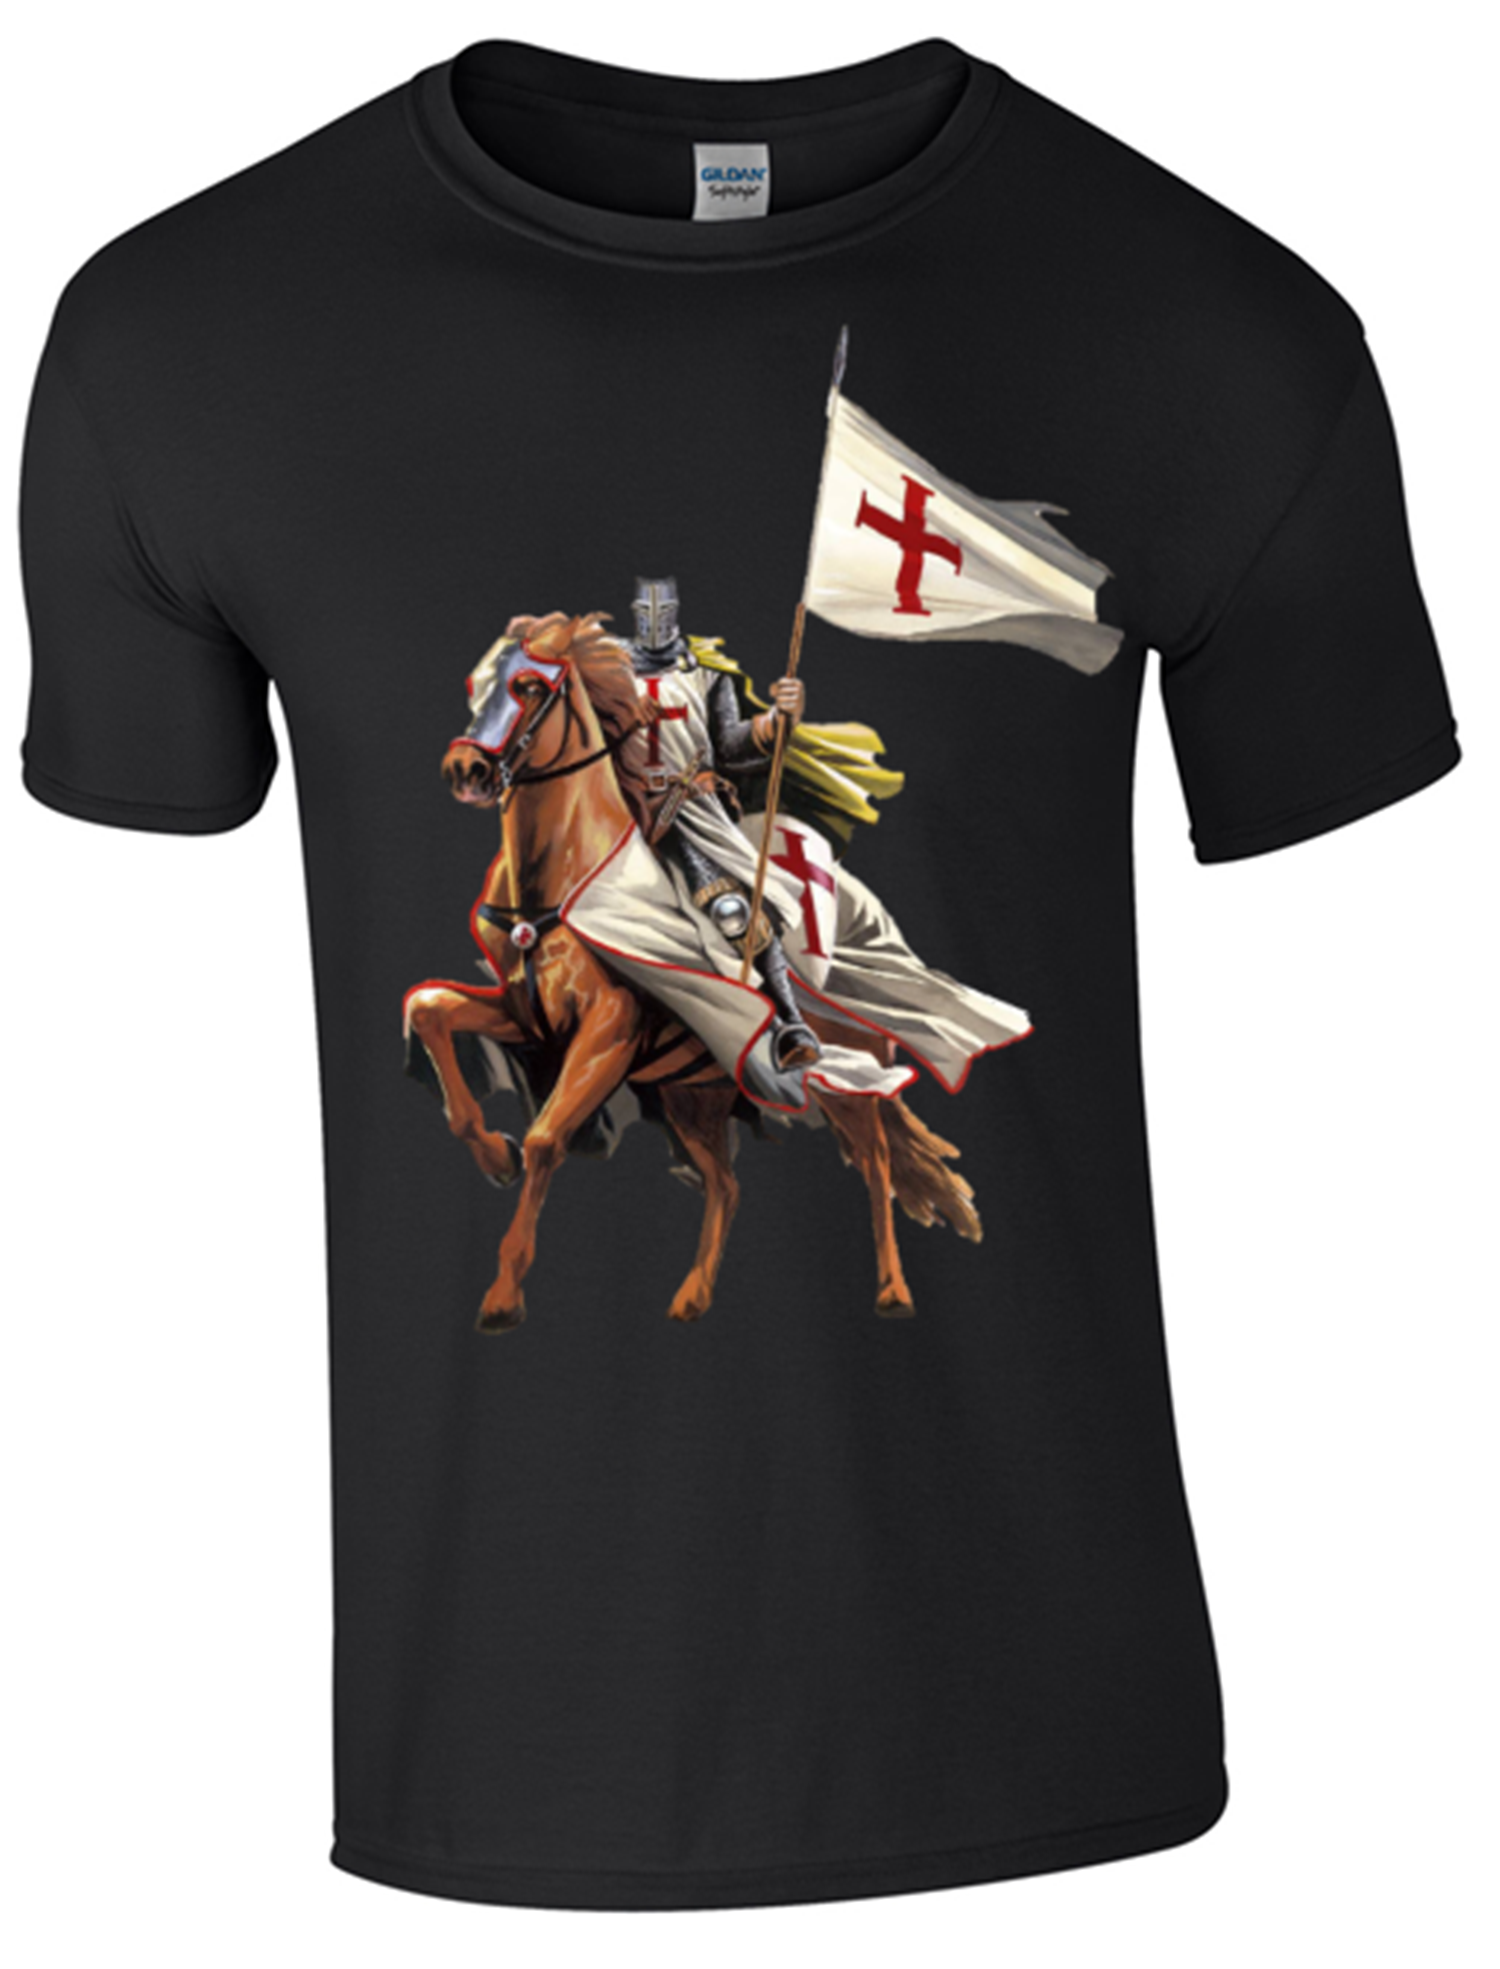 St George's Day - on Horseback - T-Shirt Printed DTG (Direct to Garment) for a Permanent Finish. - Army 1157 kit S / Black Army 1157 Kit Veterans Owned Business